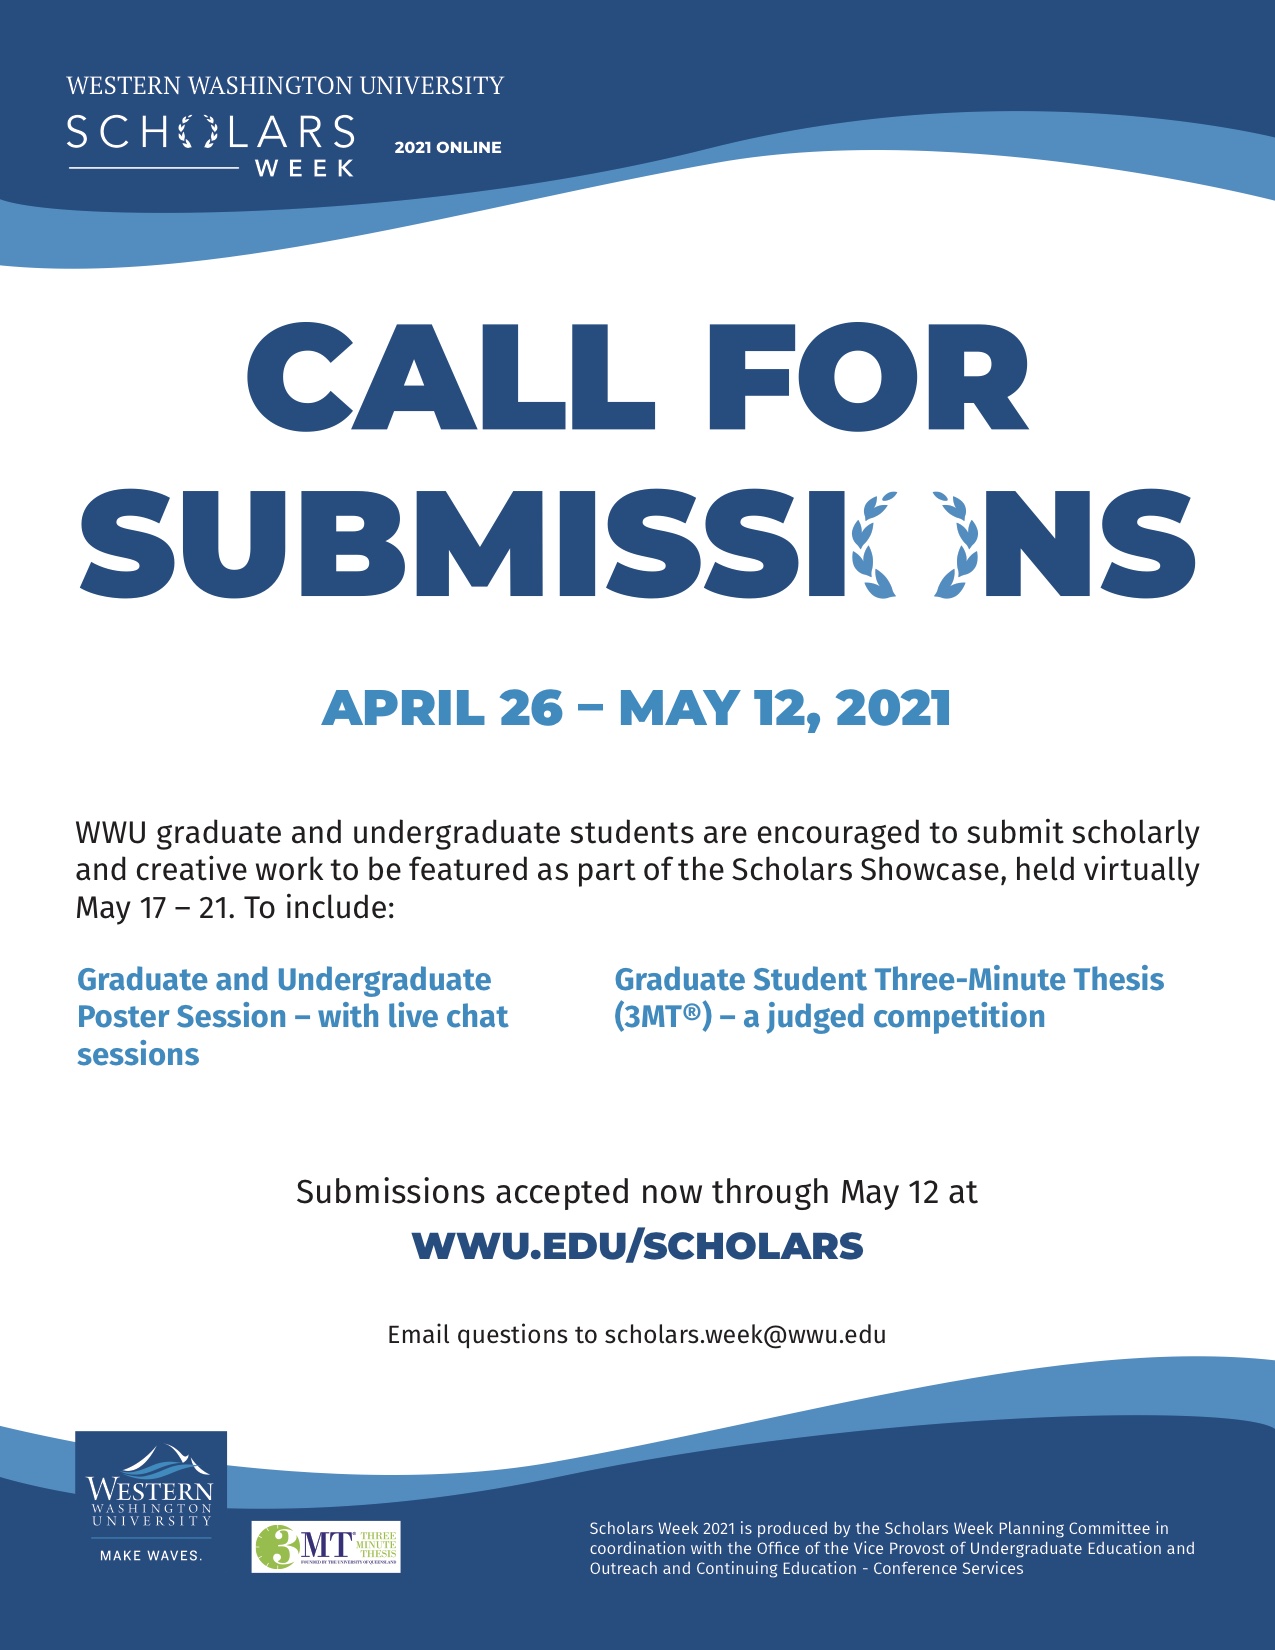 Flyer announcing that Scholars Week, to be held May 17 through May 21, 2021, is accepting submissions from April 26 - May 12 for the Scholars Showcase Poster Session and Graduate Student Three-Minute Thesis Competition. 